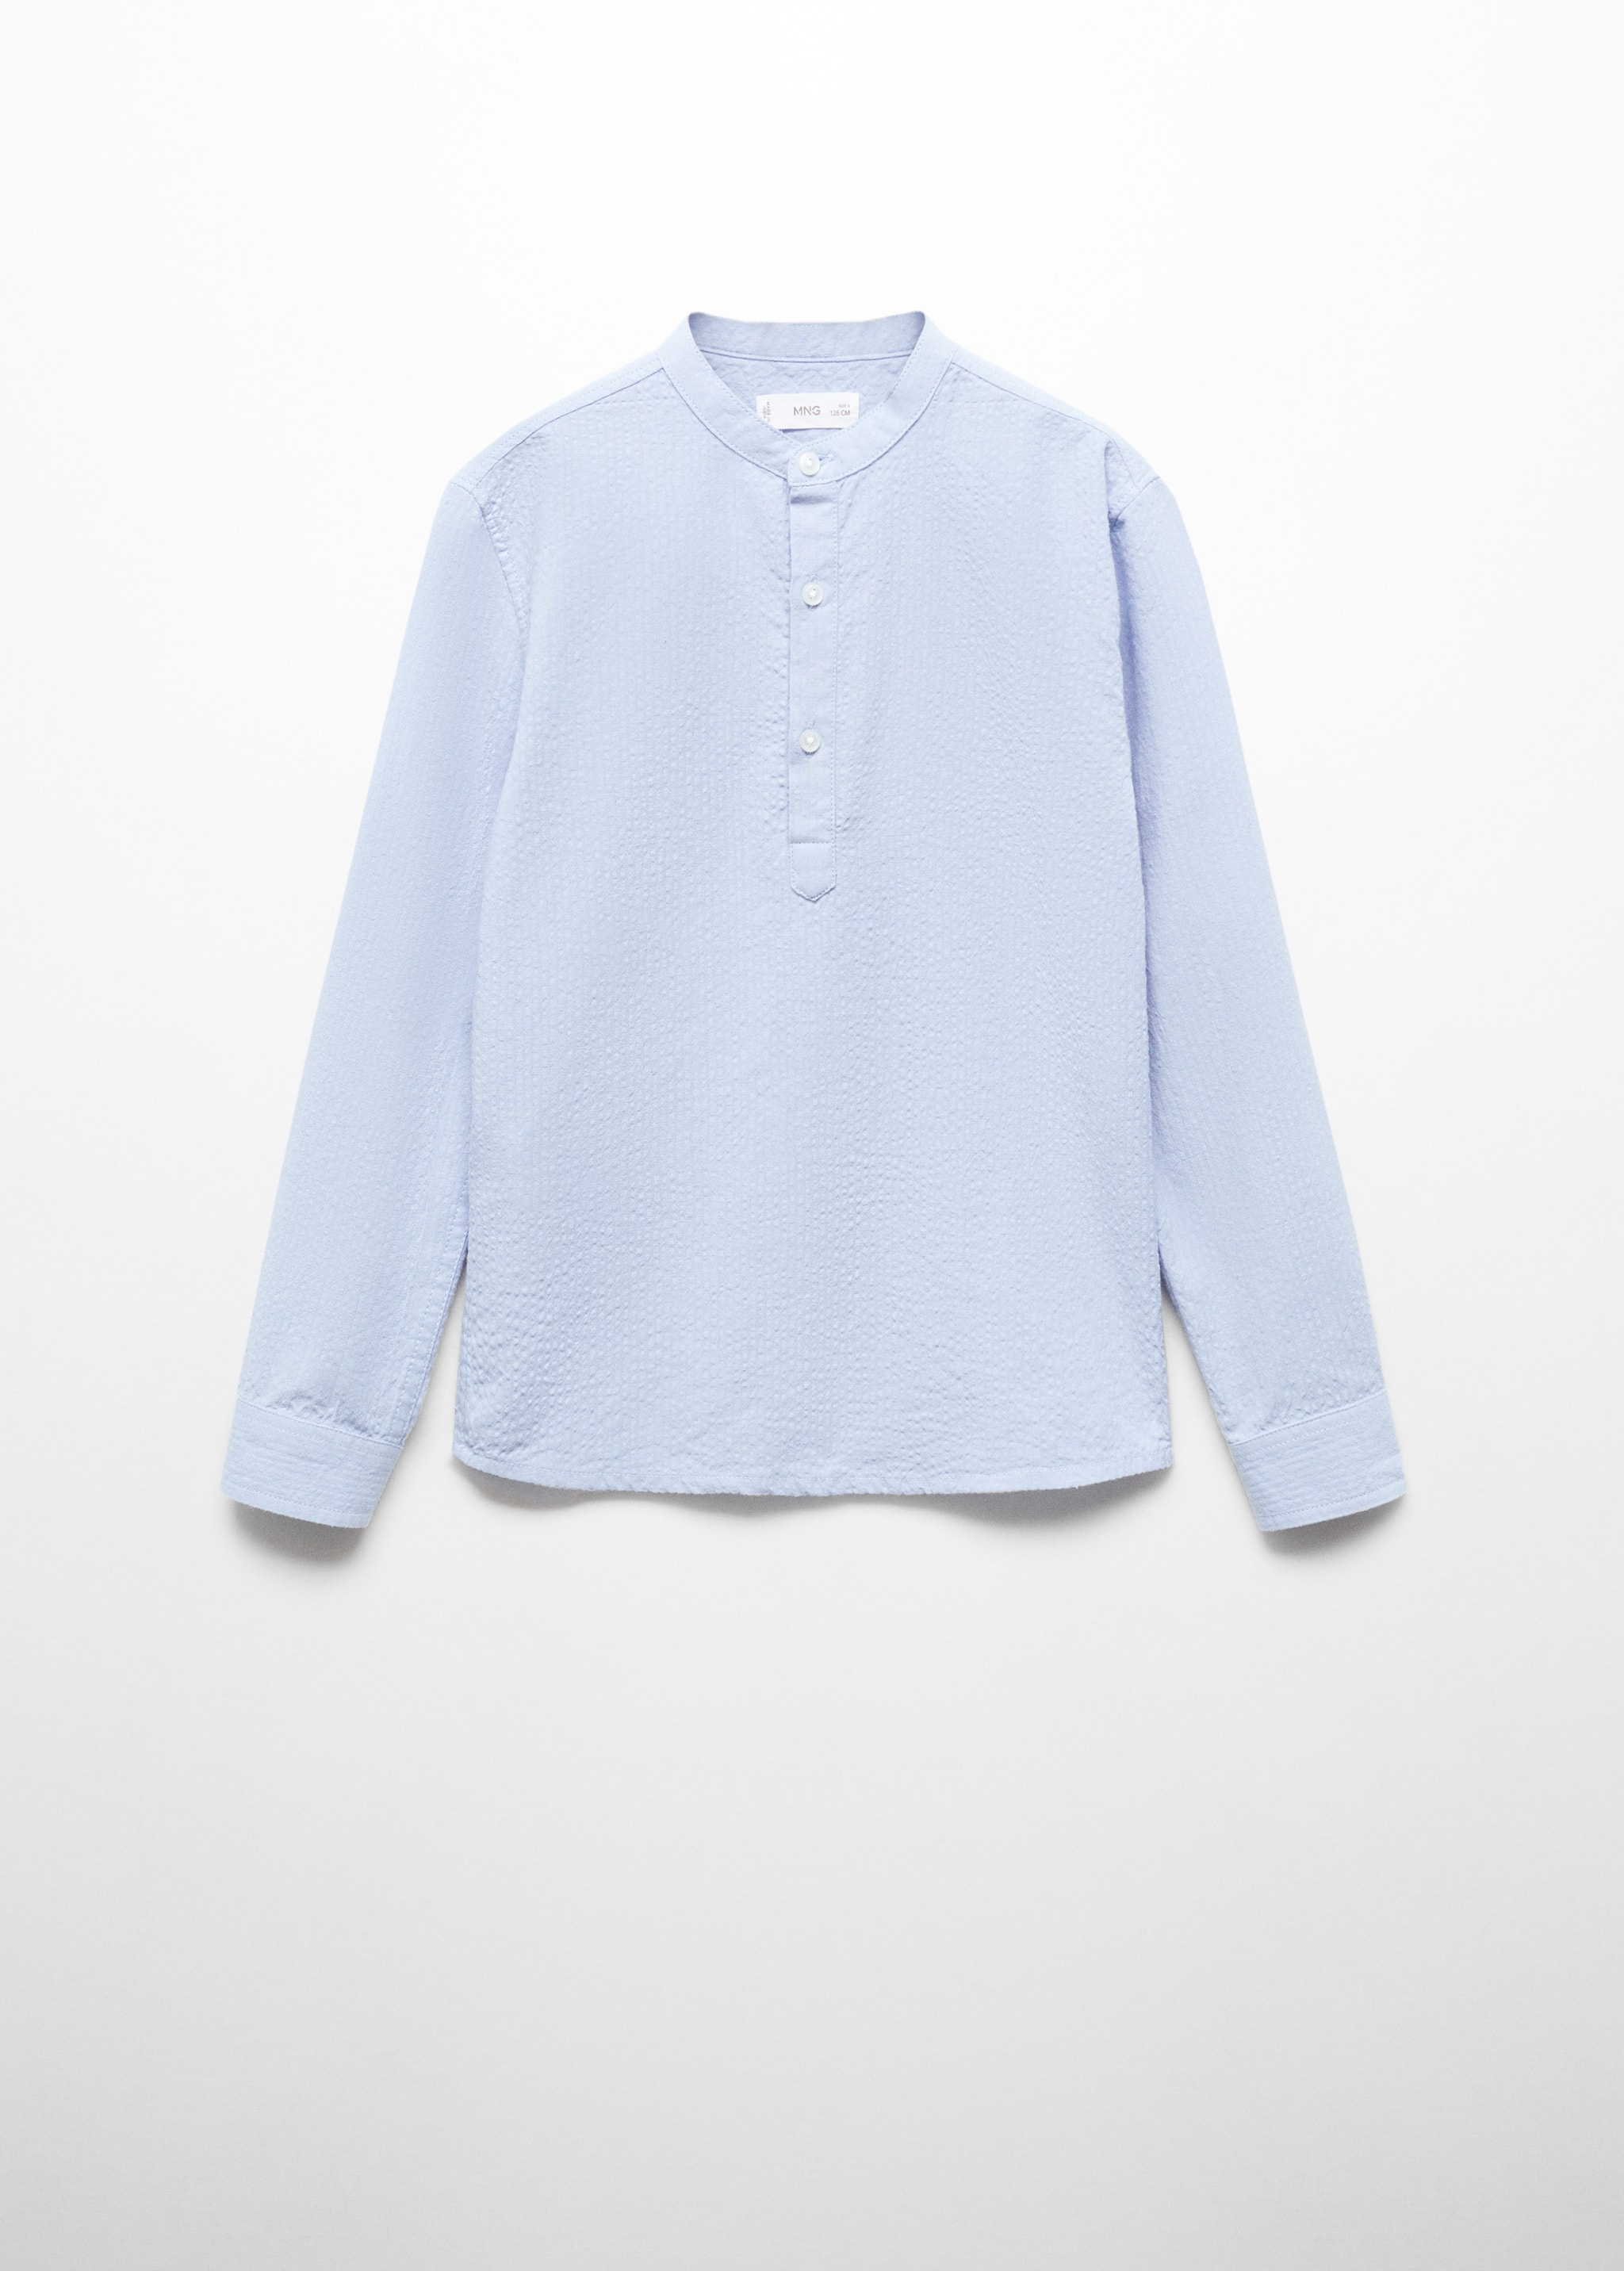 Regular fit Mao collar shirt - Article without model